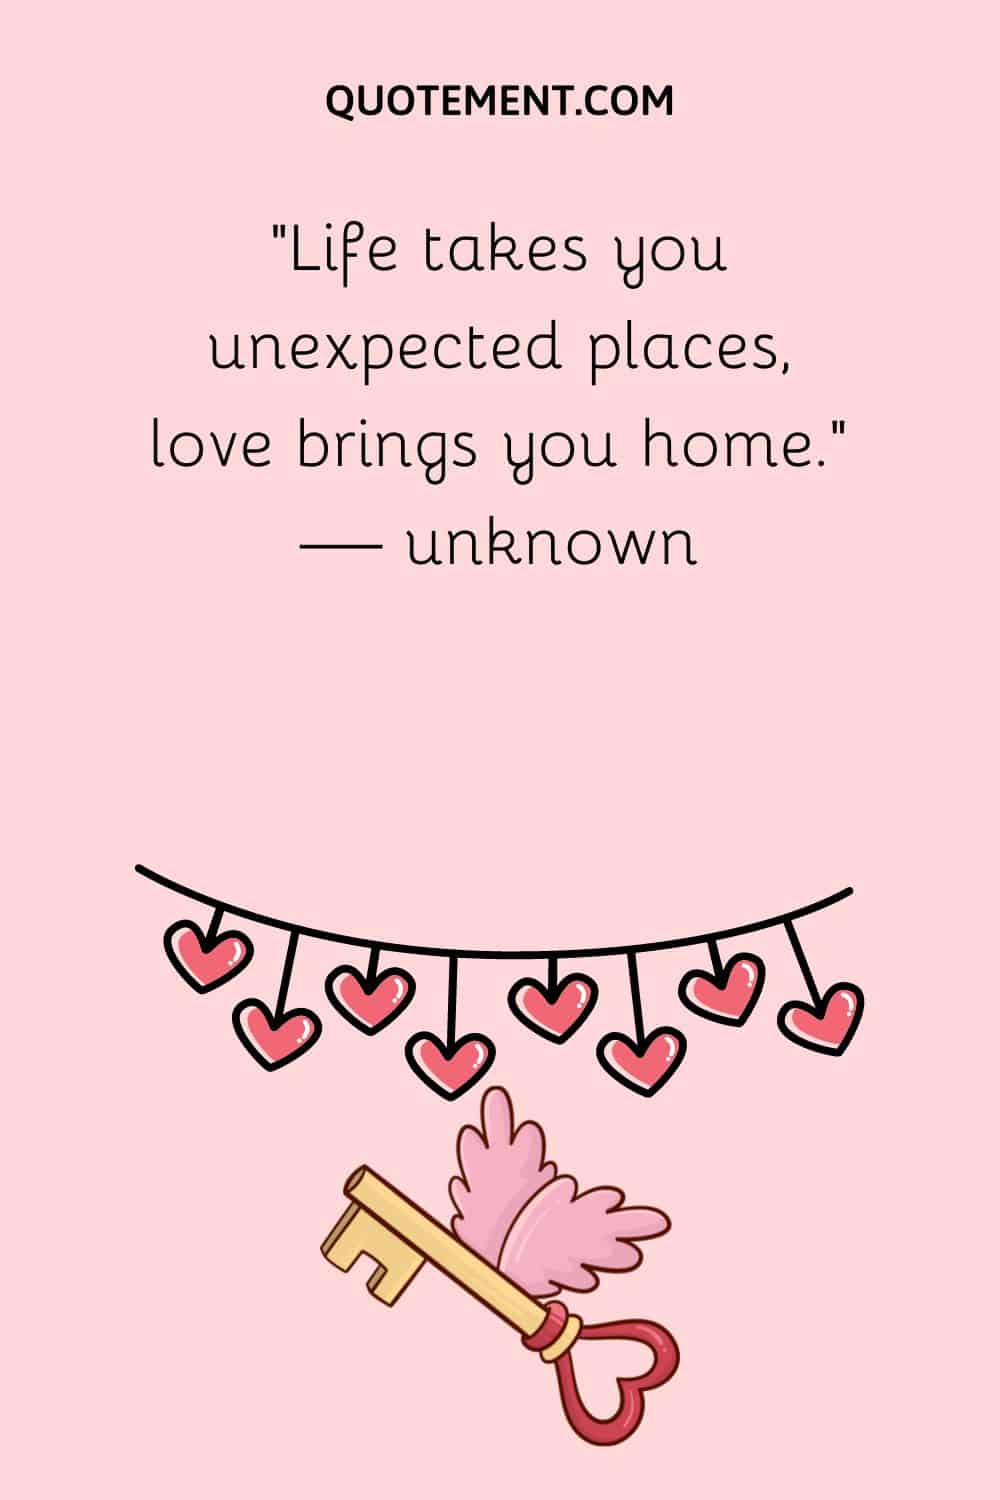 “Life takes you unexpected places, love brings you home.” — unknown